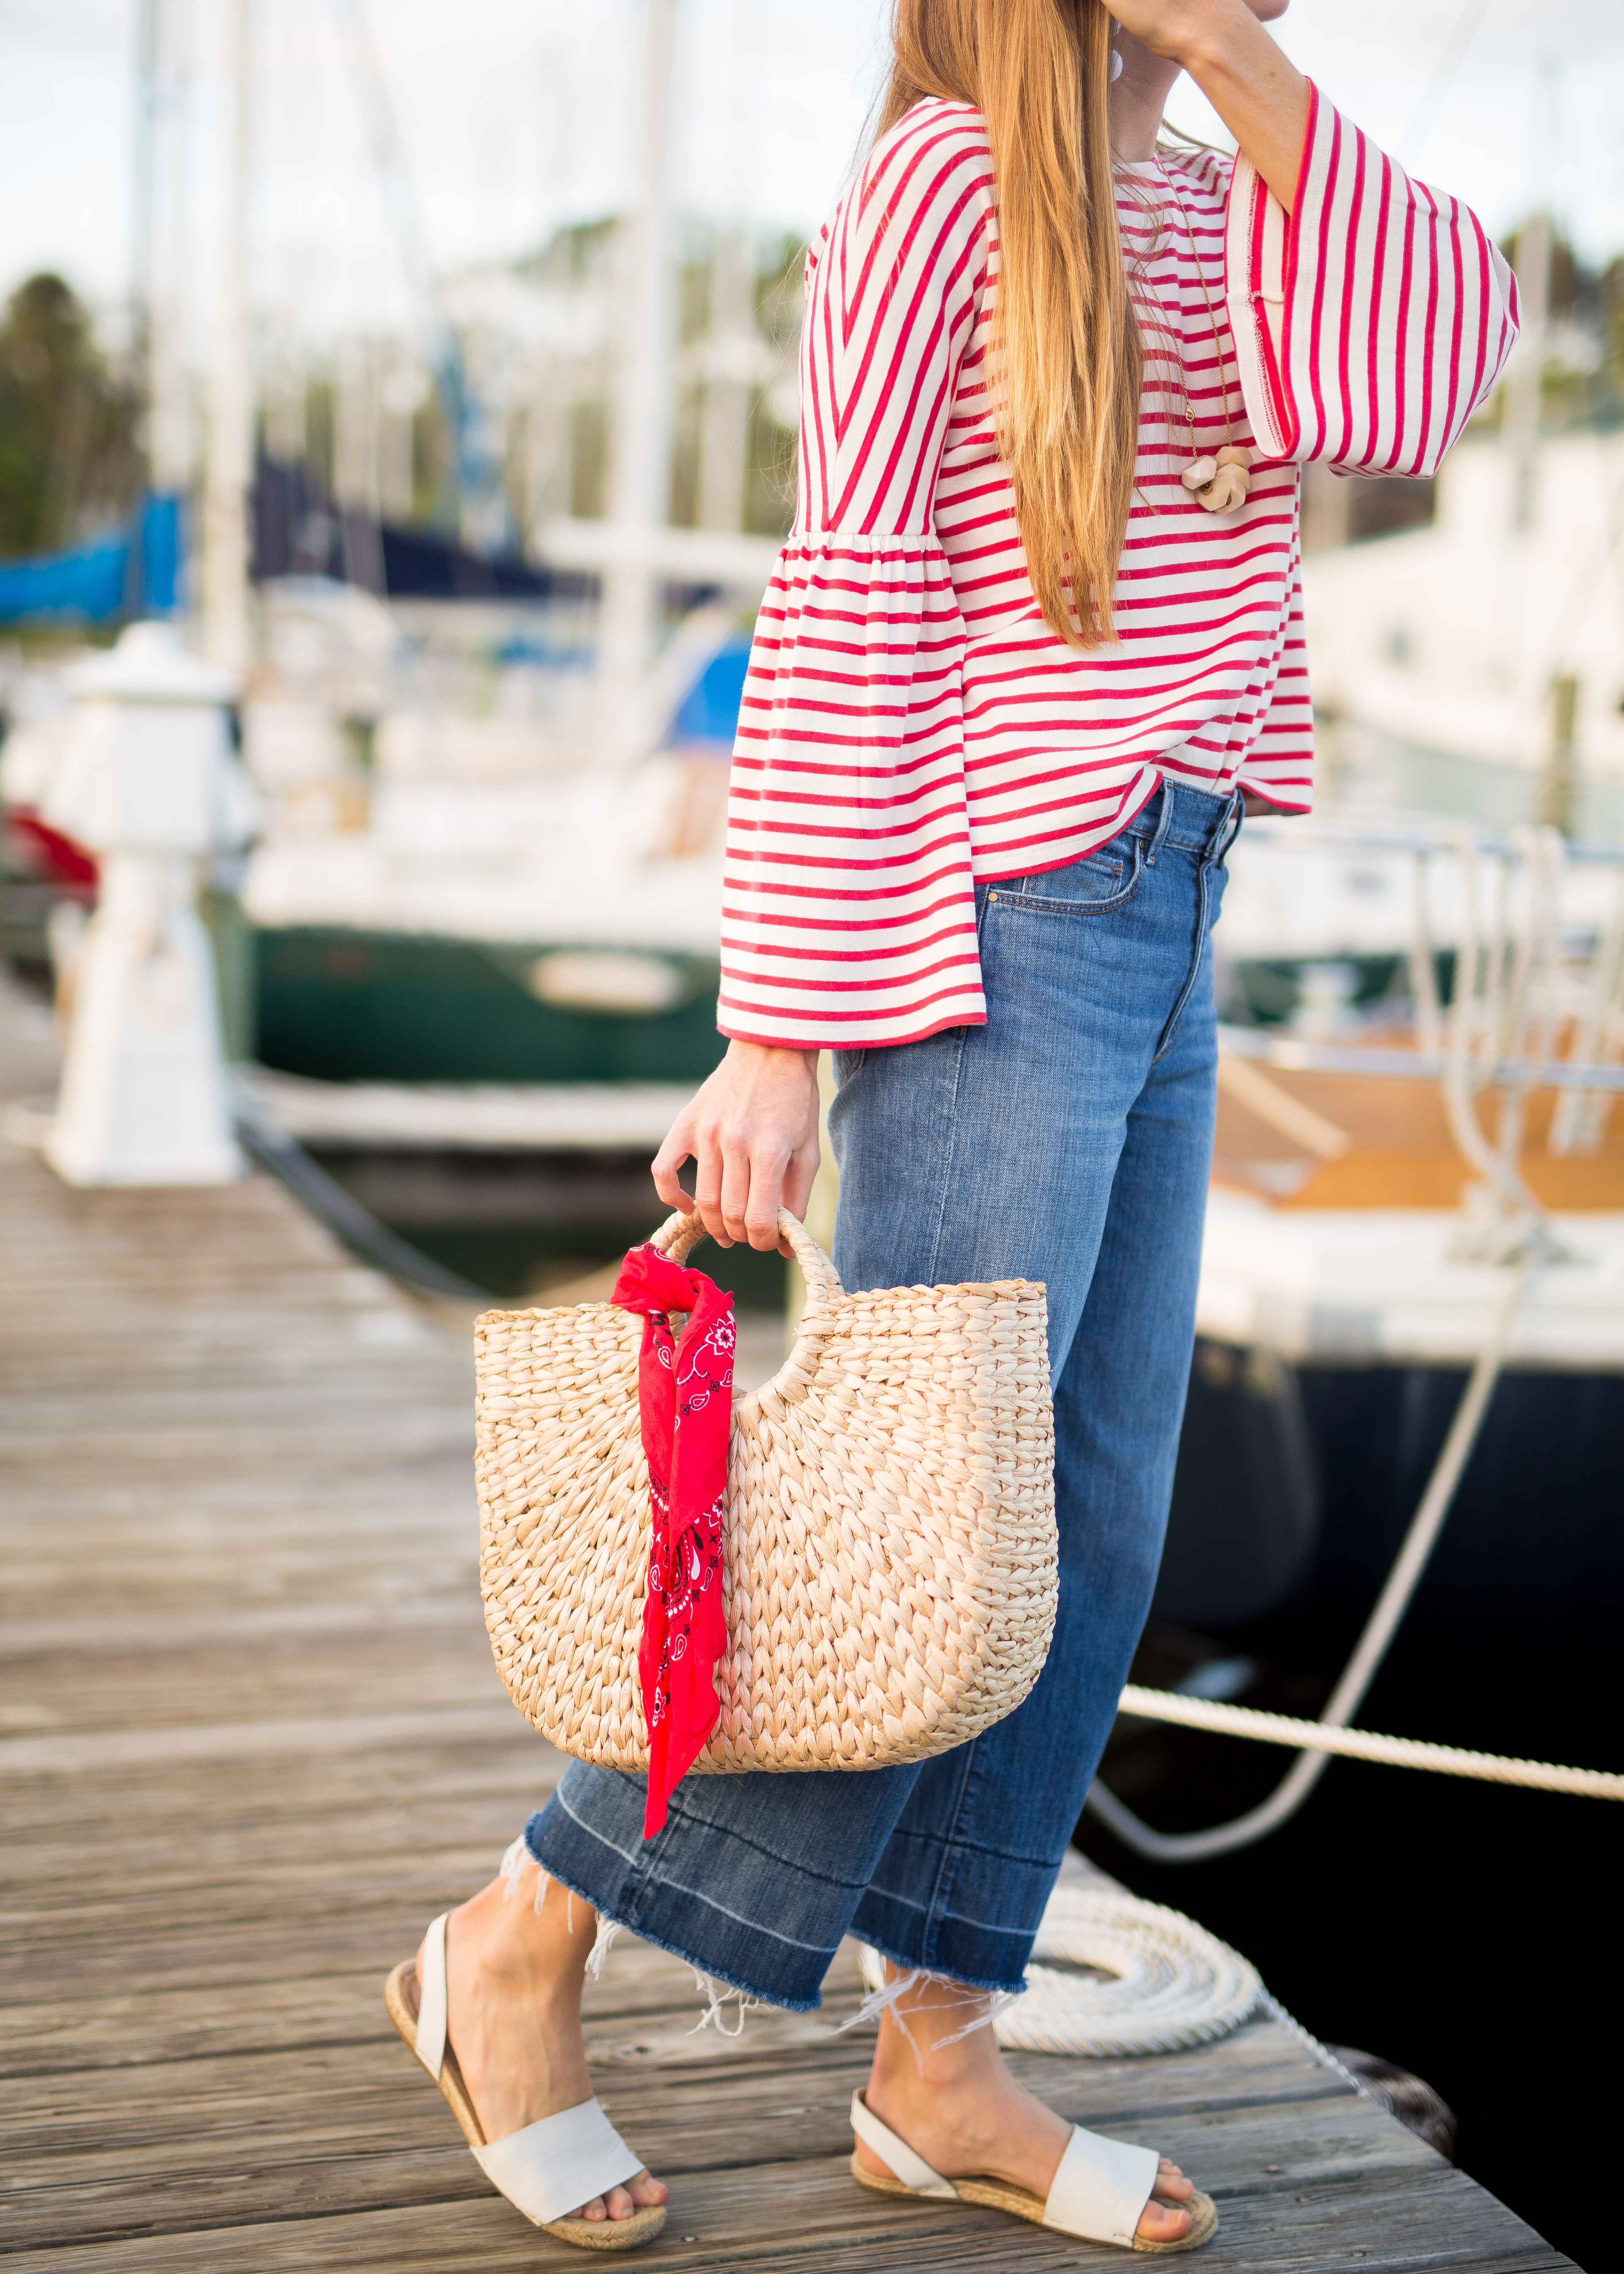 transitioning straw bags into fall